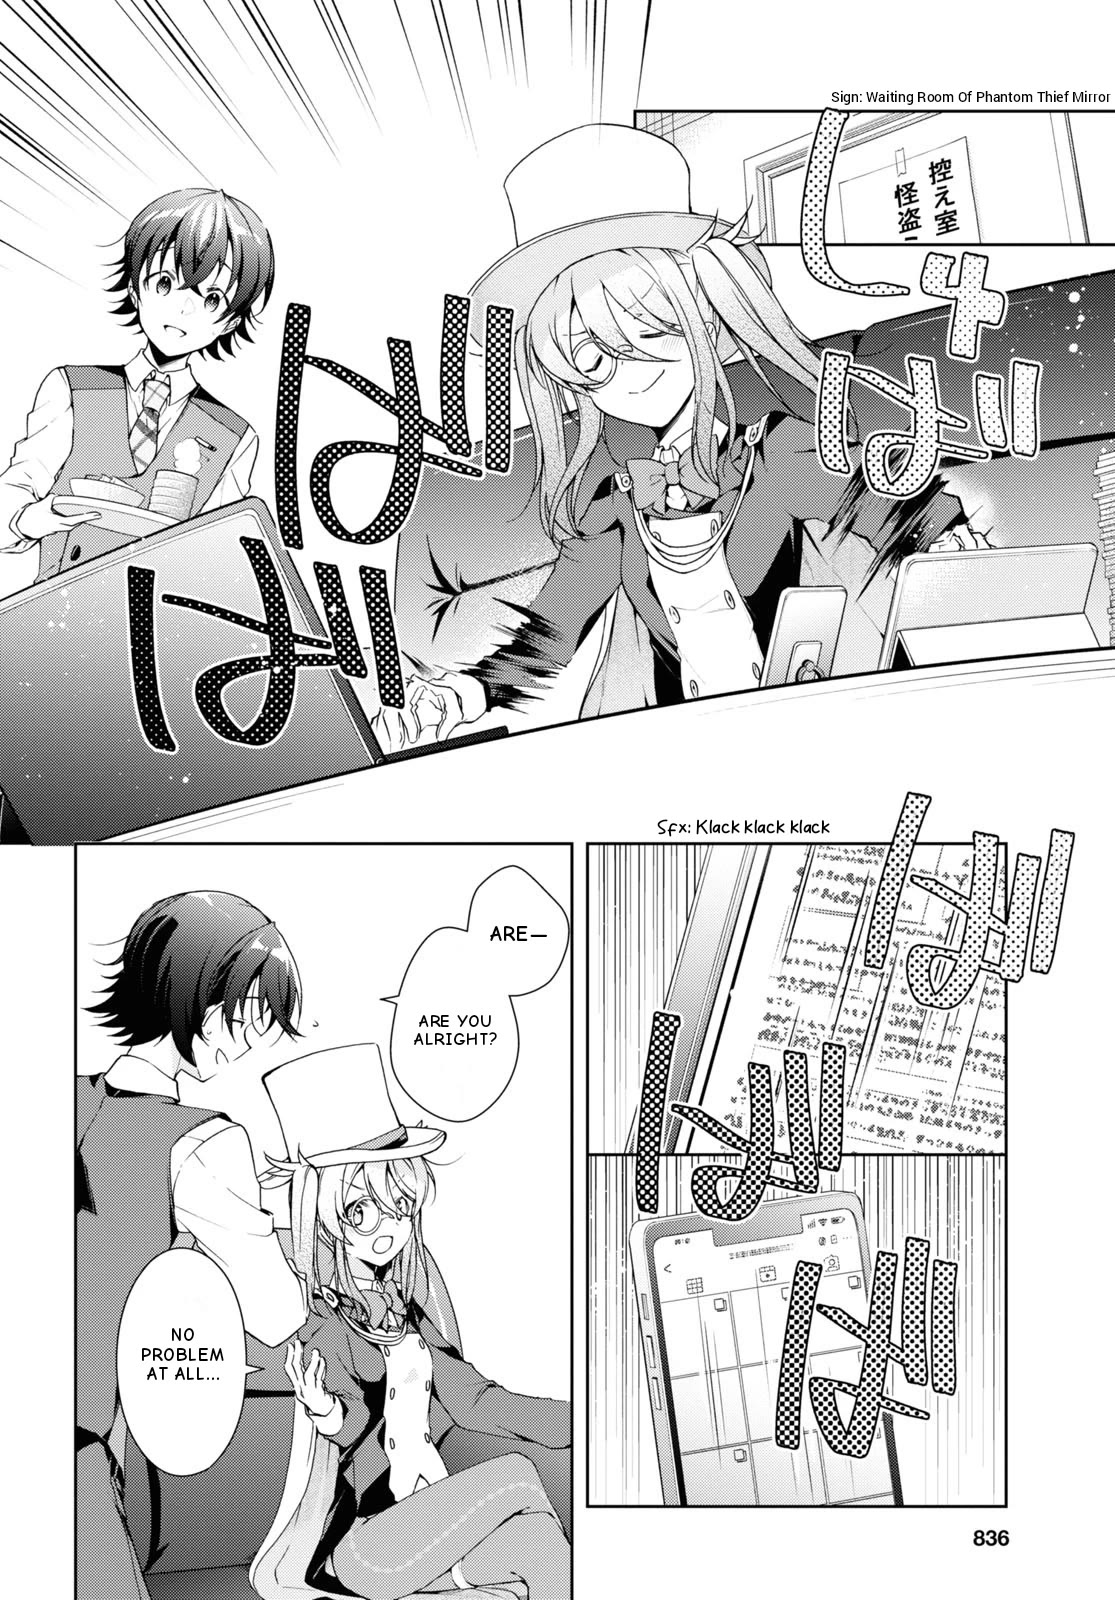 Isshiki-san Wants to Know About Love. - chapter 32 - #6